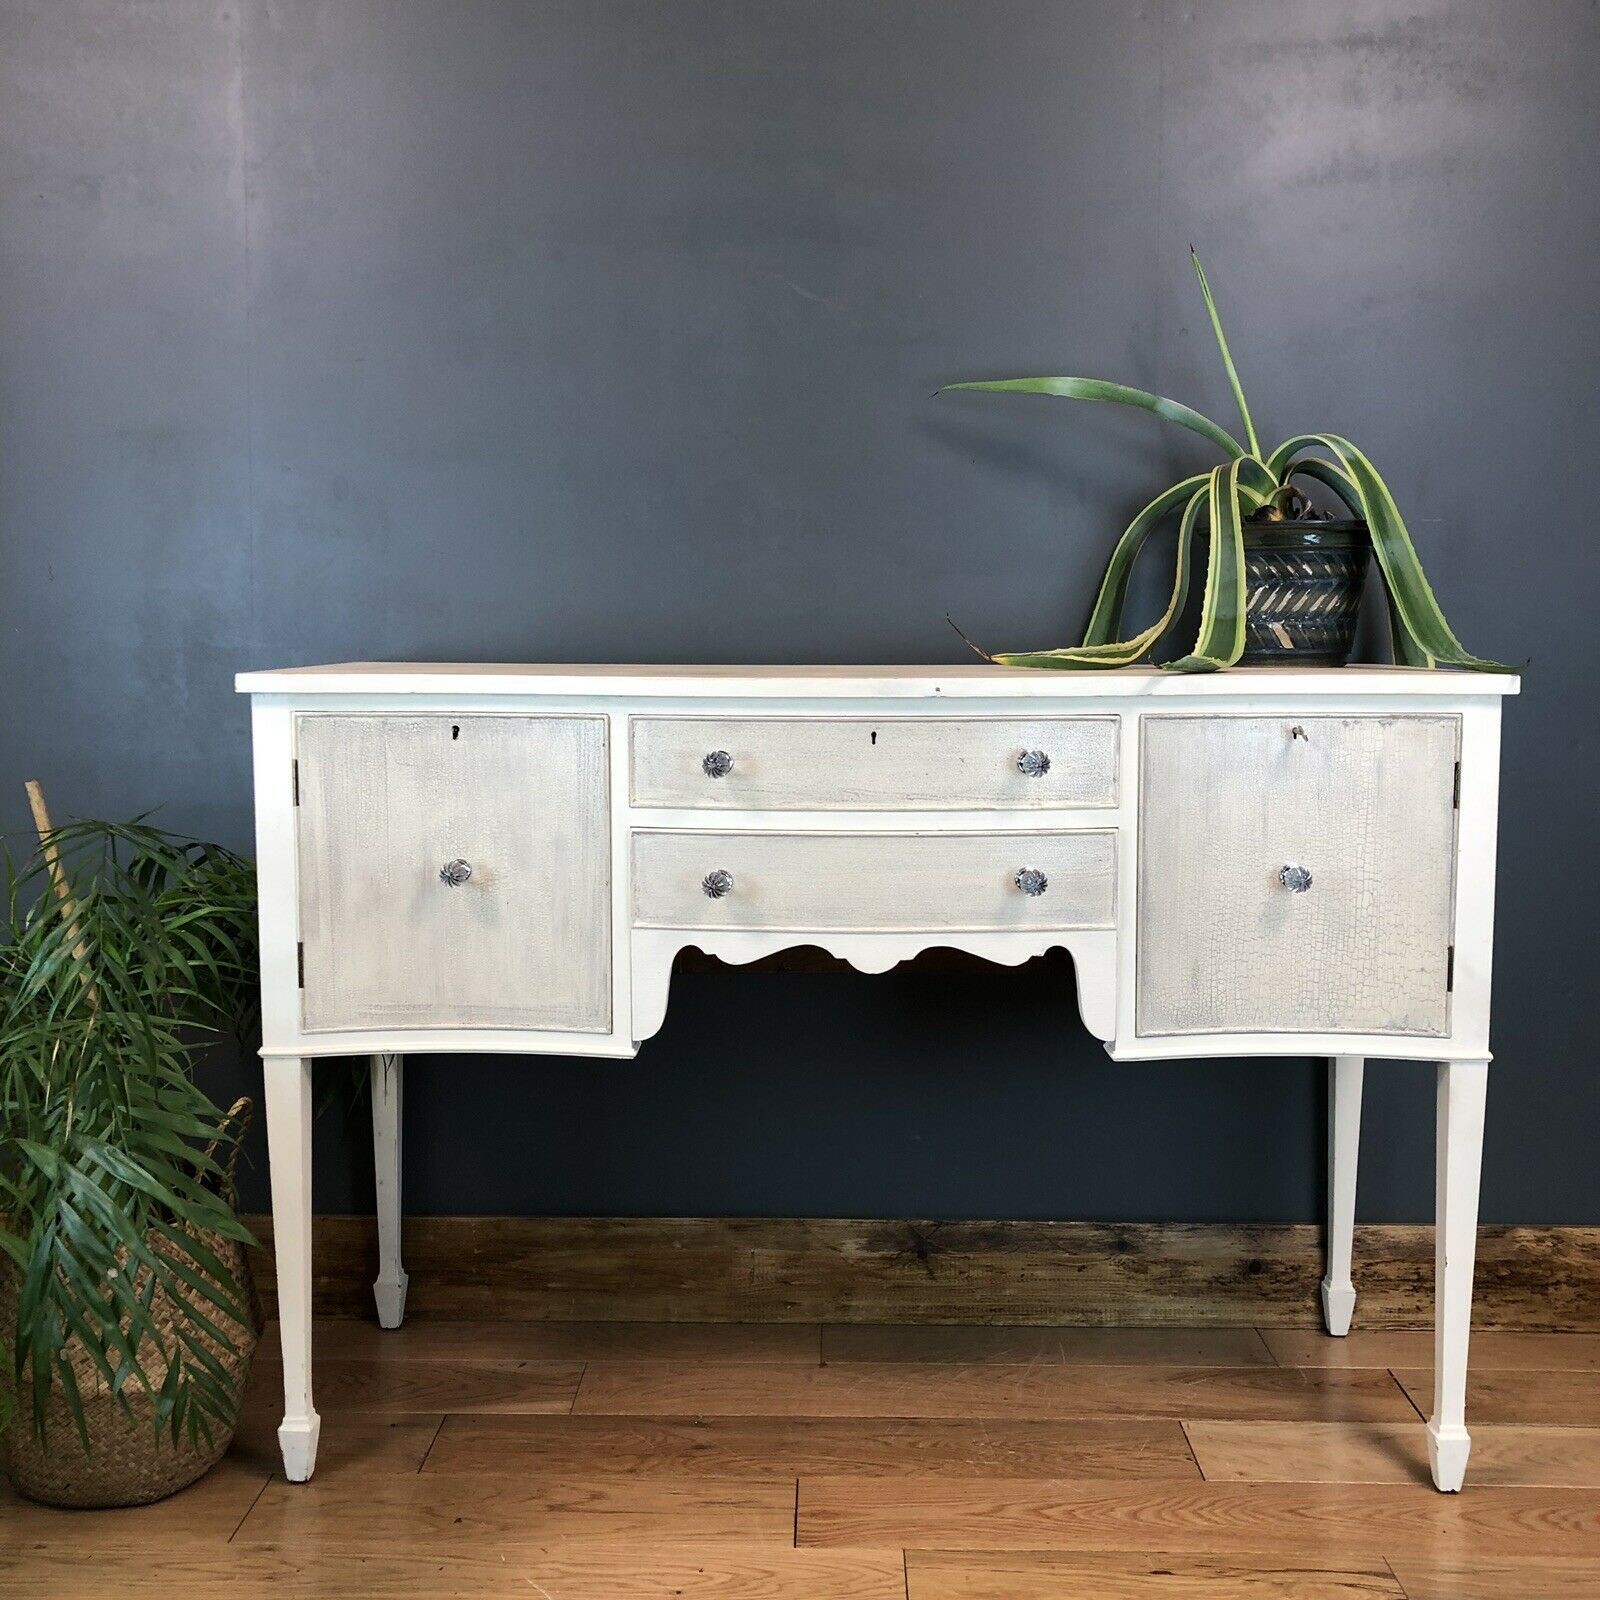 Shabby chic sideboard cabinet to lend weathered charm